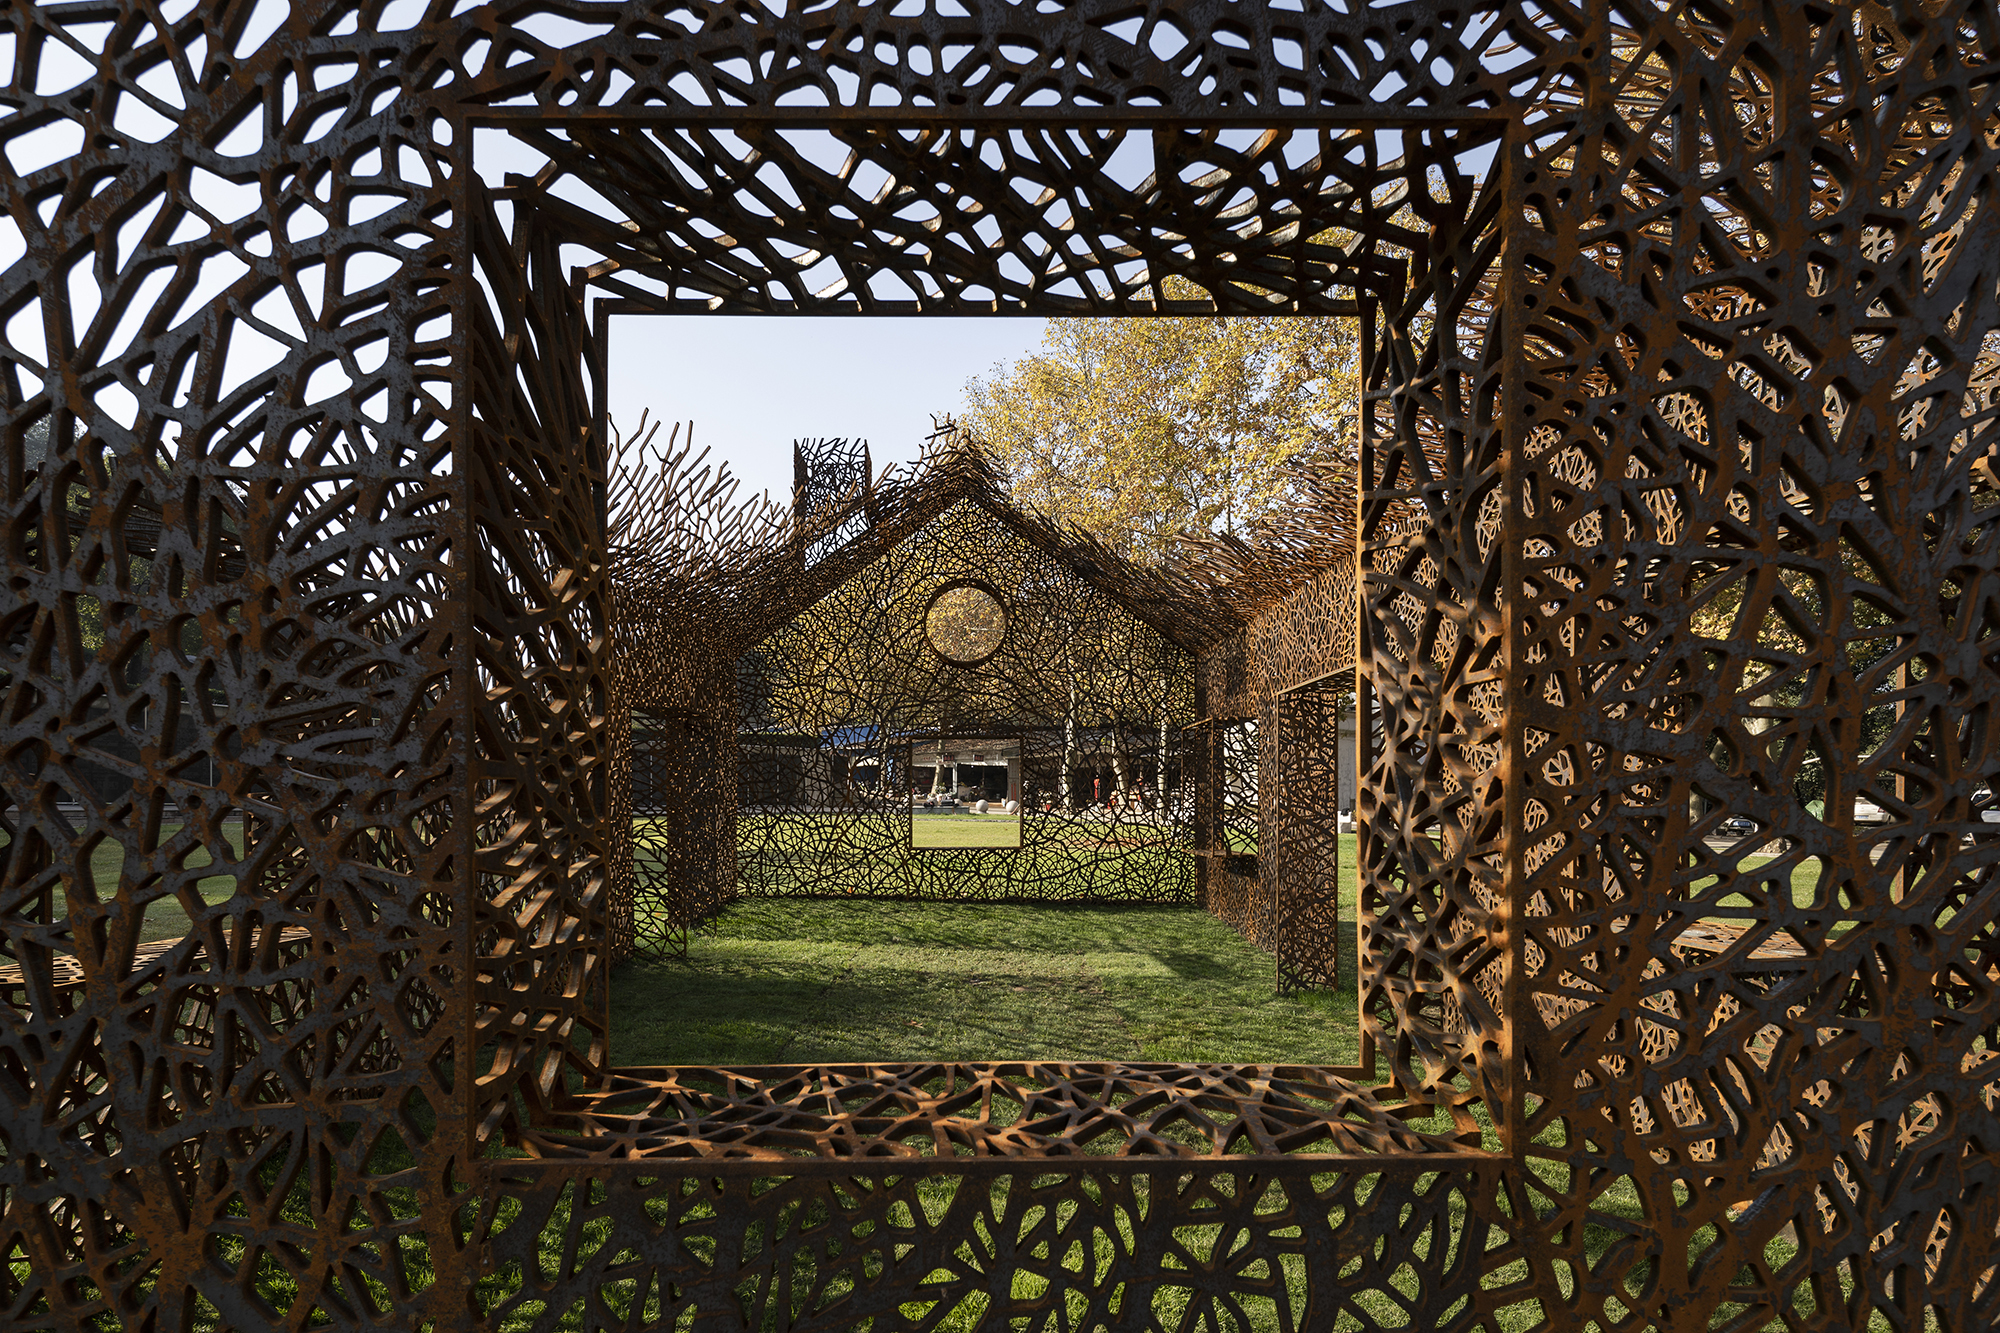 The Vanished House was realized through laser engraving of Corten steel